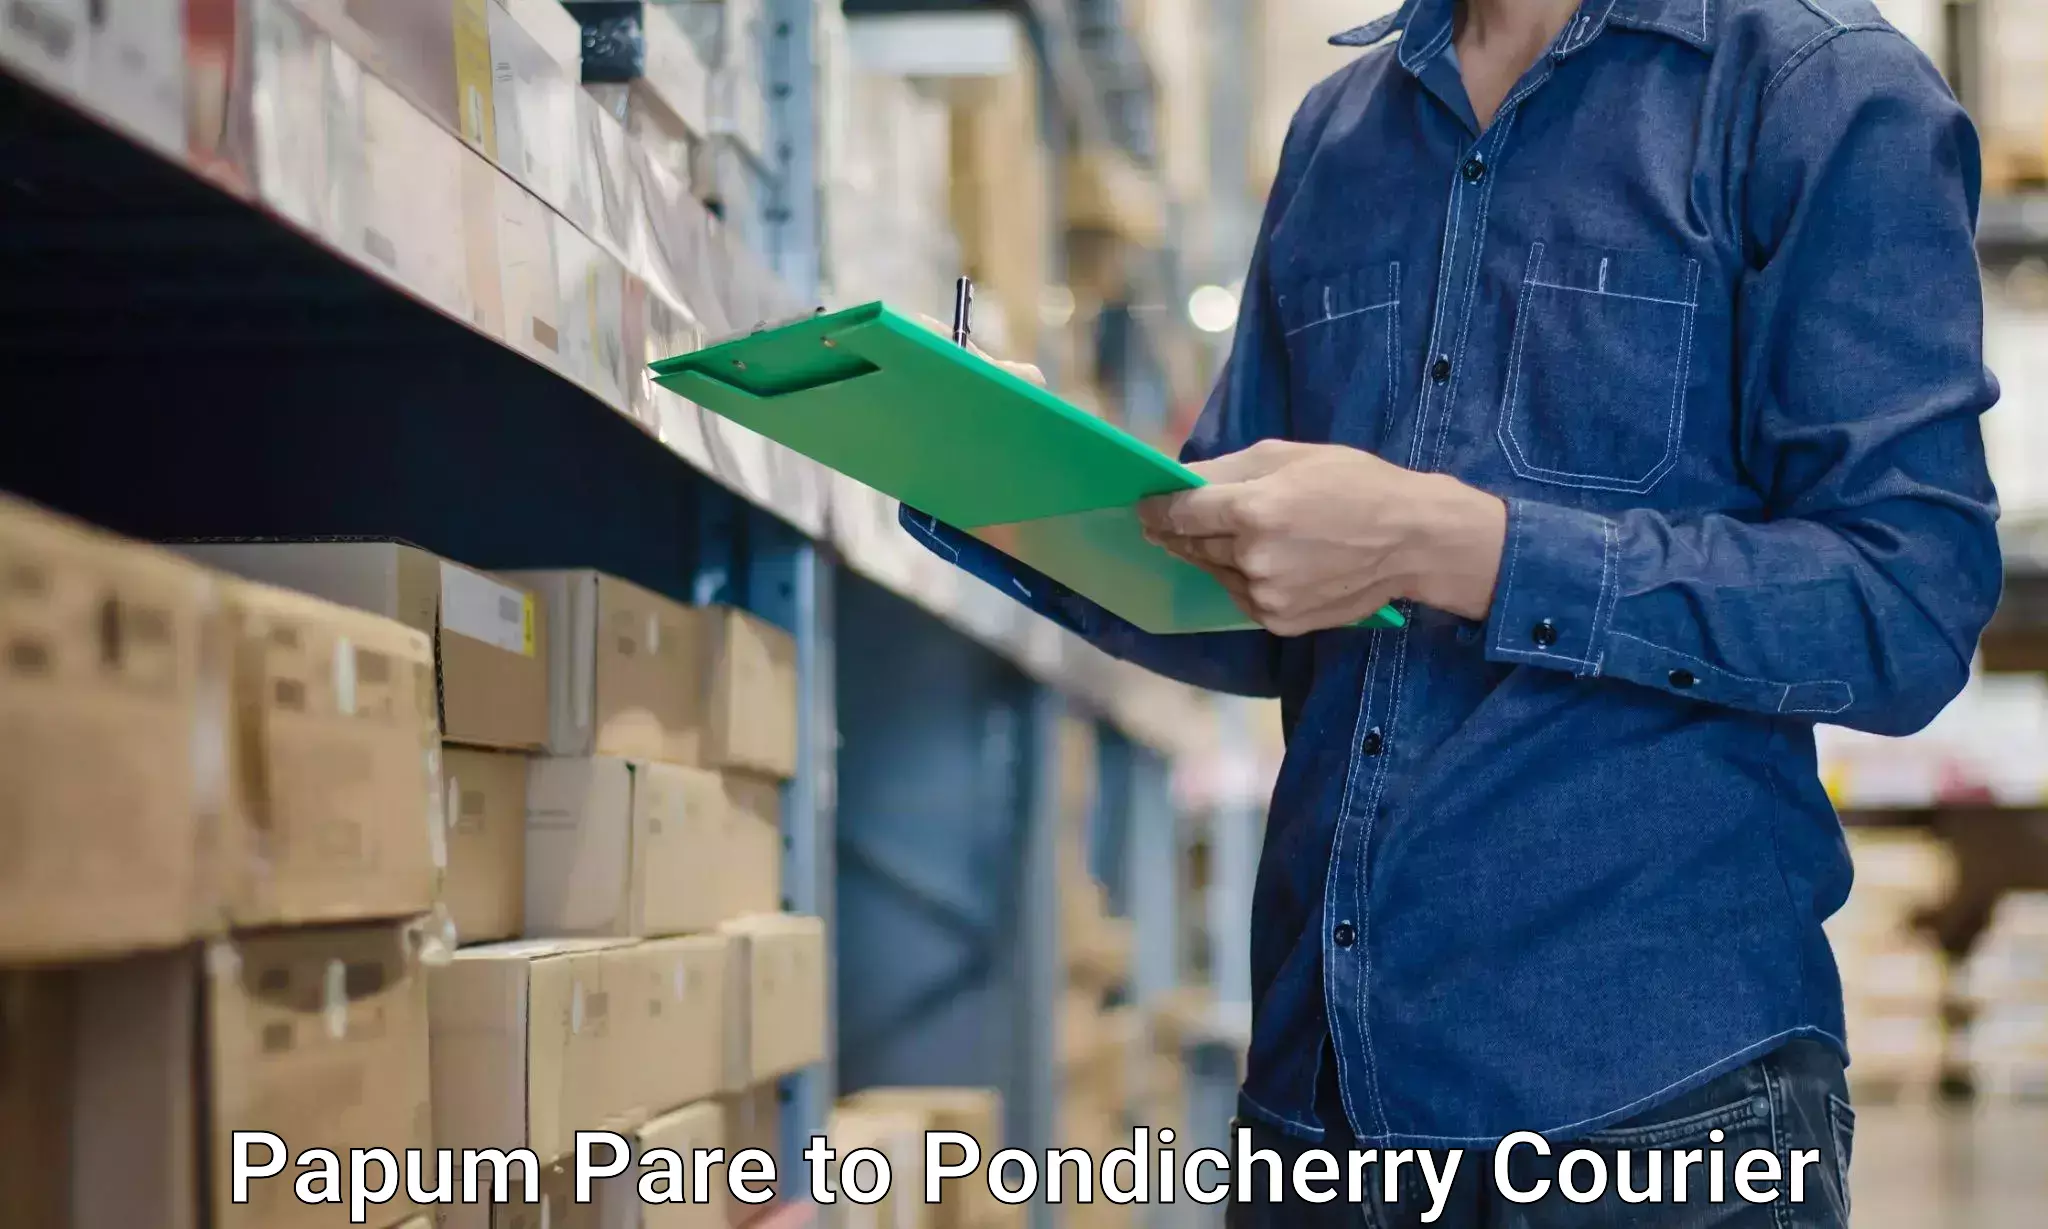 Home relocation experts Papum Pare to Pondicherry